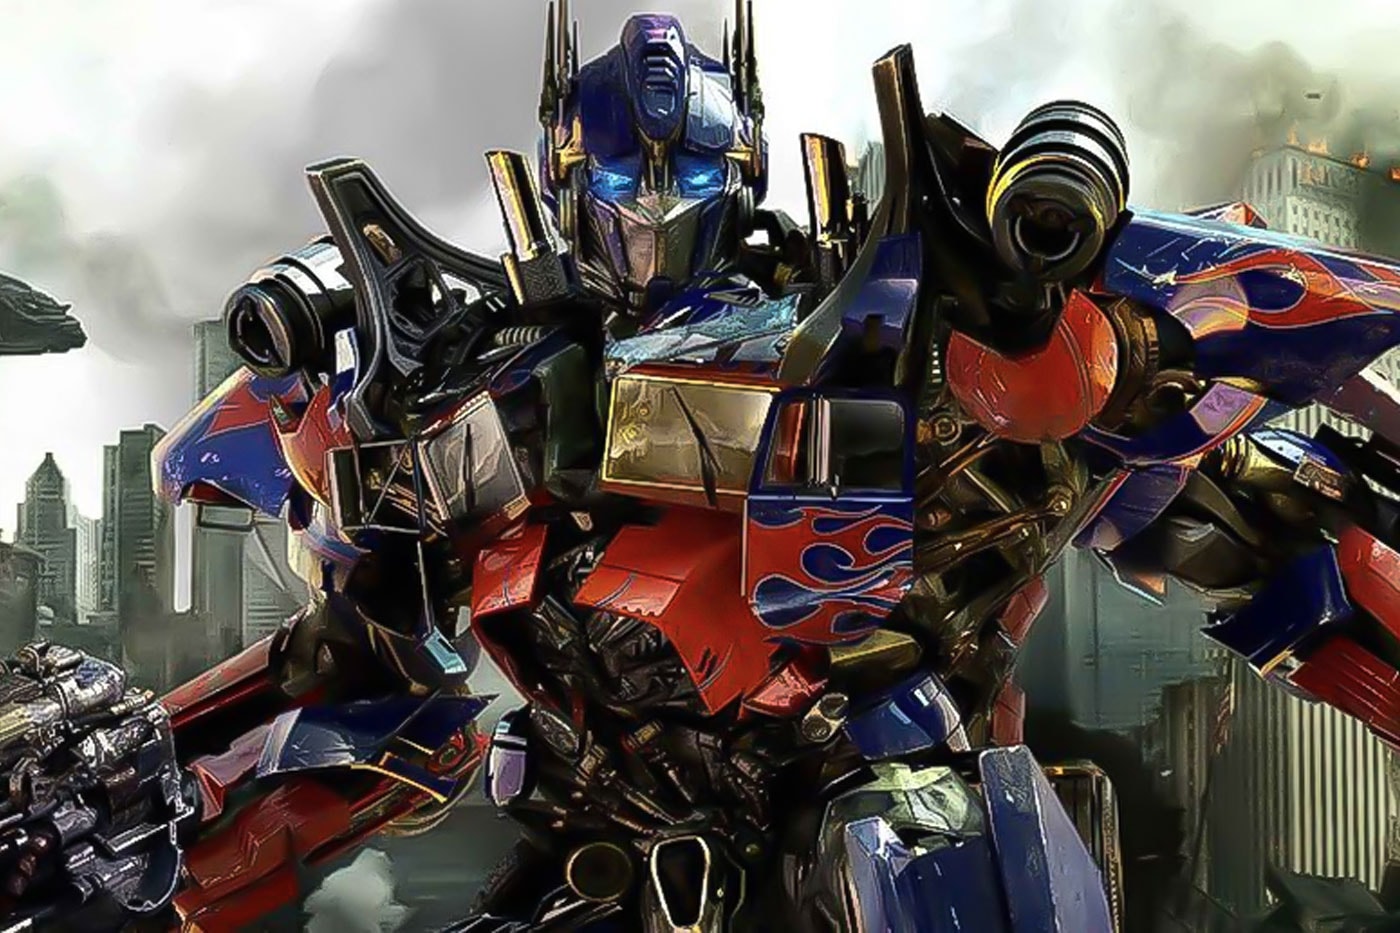 All Upcoming Transformers Movies Explained